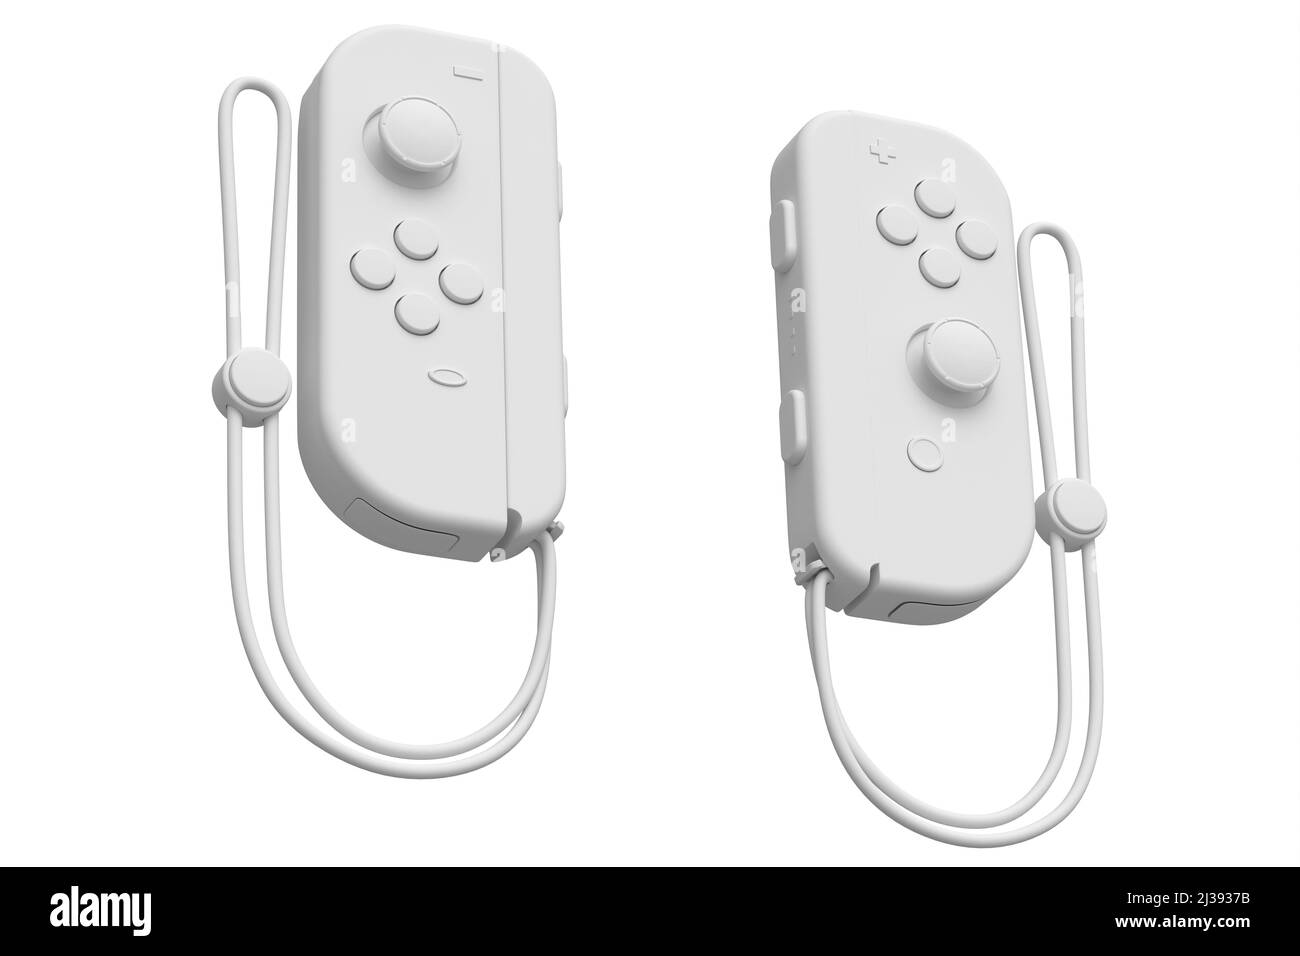 Portable video game controllers on the rope on white monochrome background. 3D render of gamepad for smartphone for online gaming Stock Photo